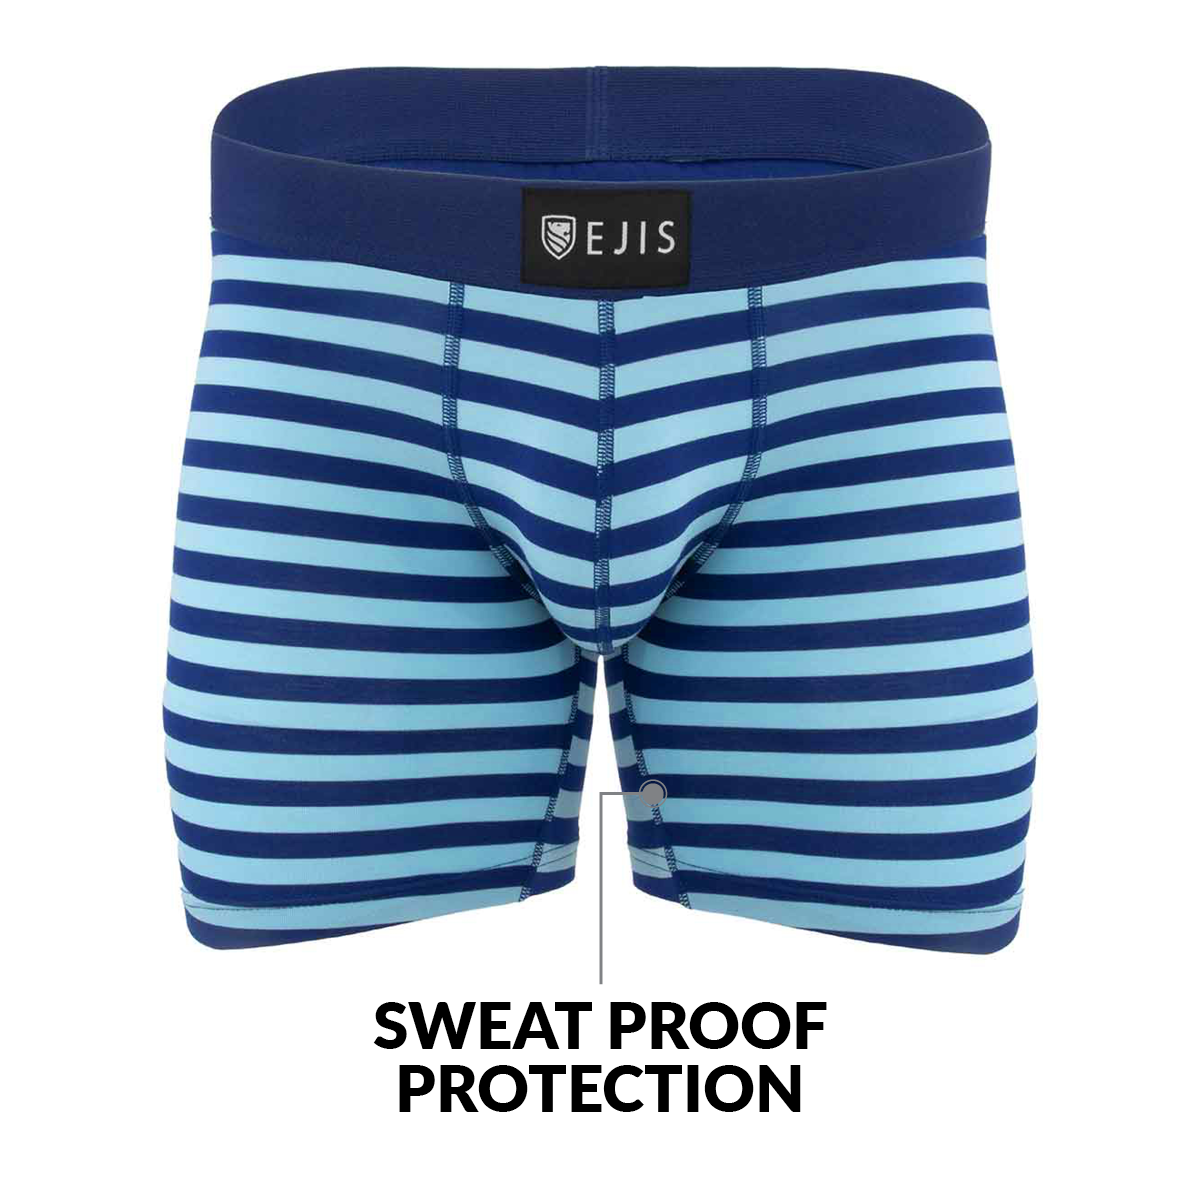 Sweat Proof Men's Boxer Briefs with Pouch - Ejis